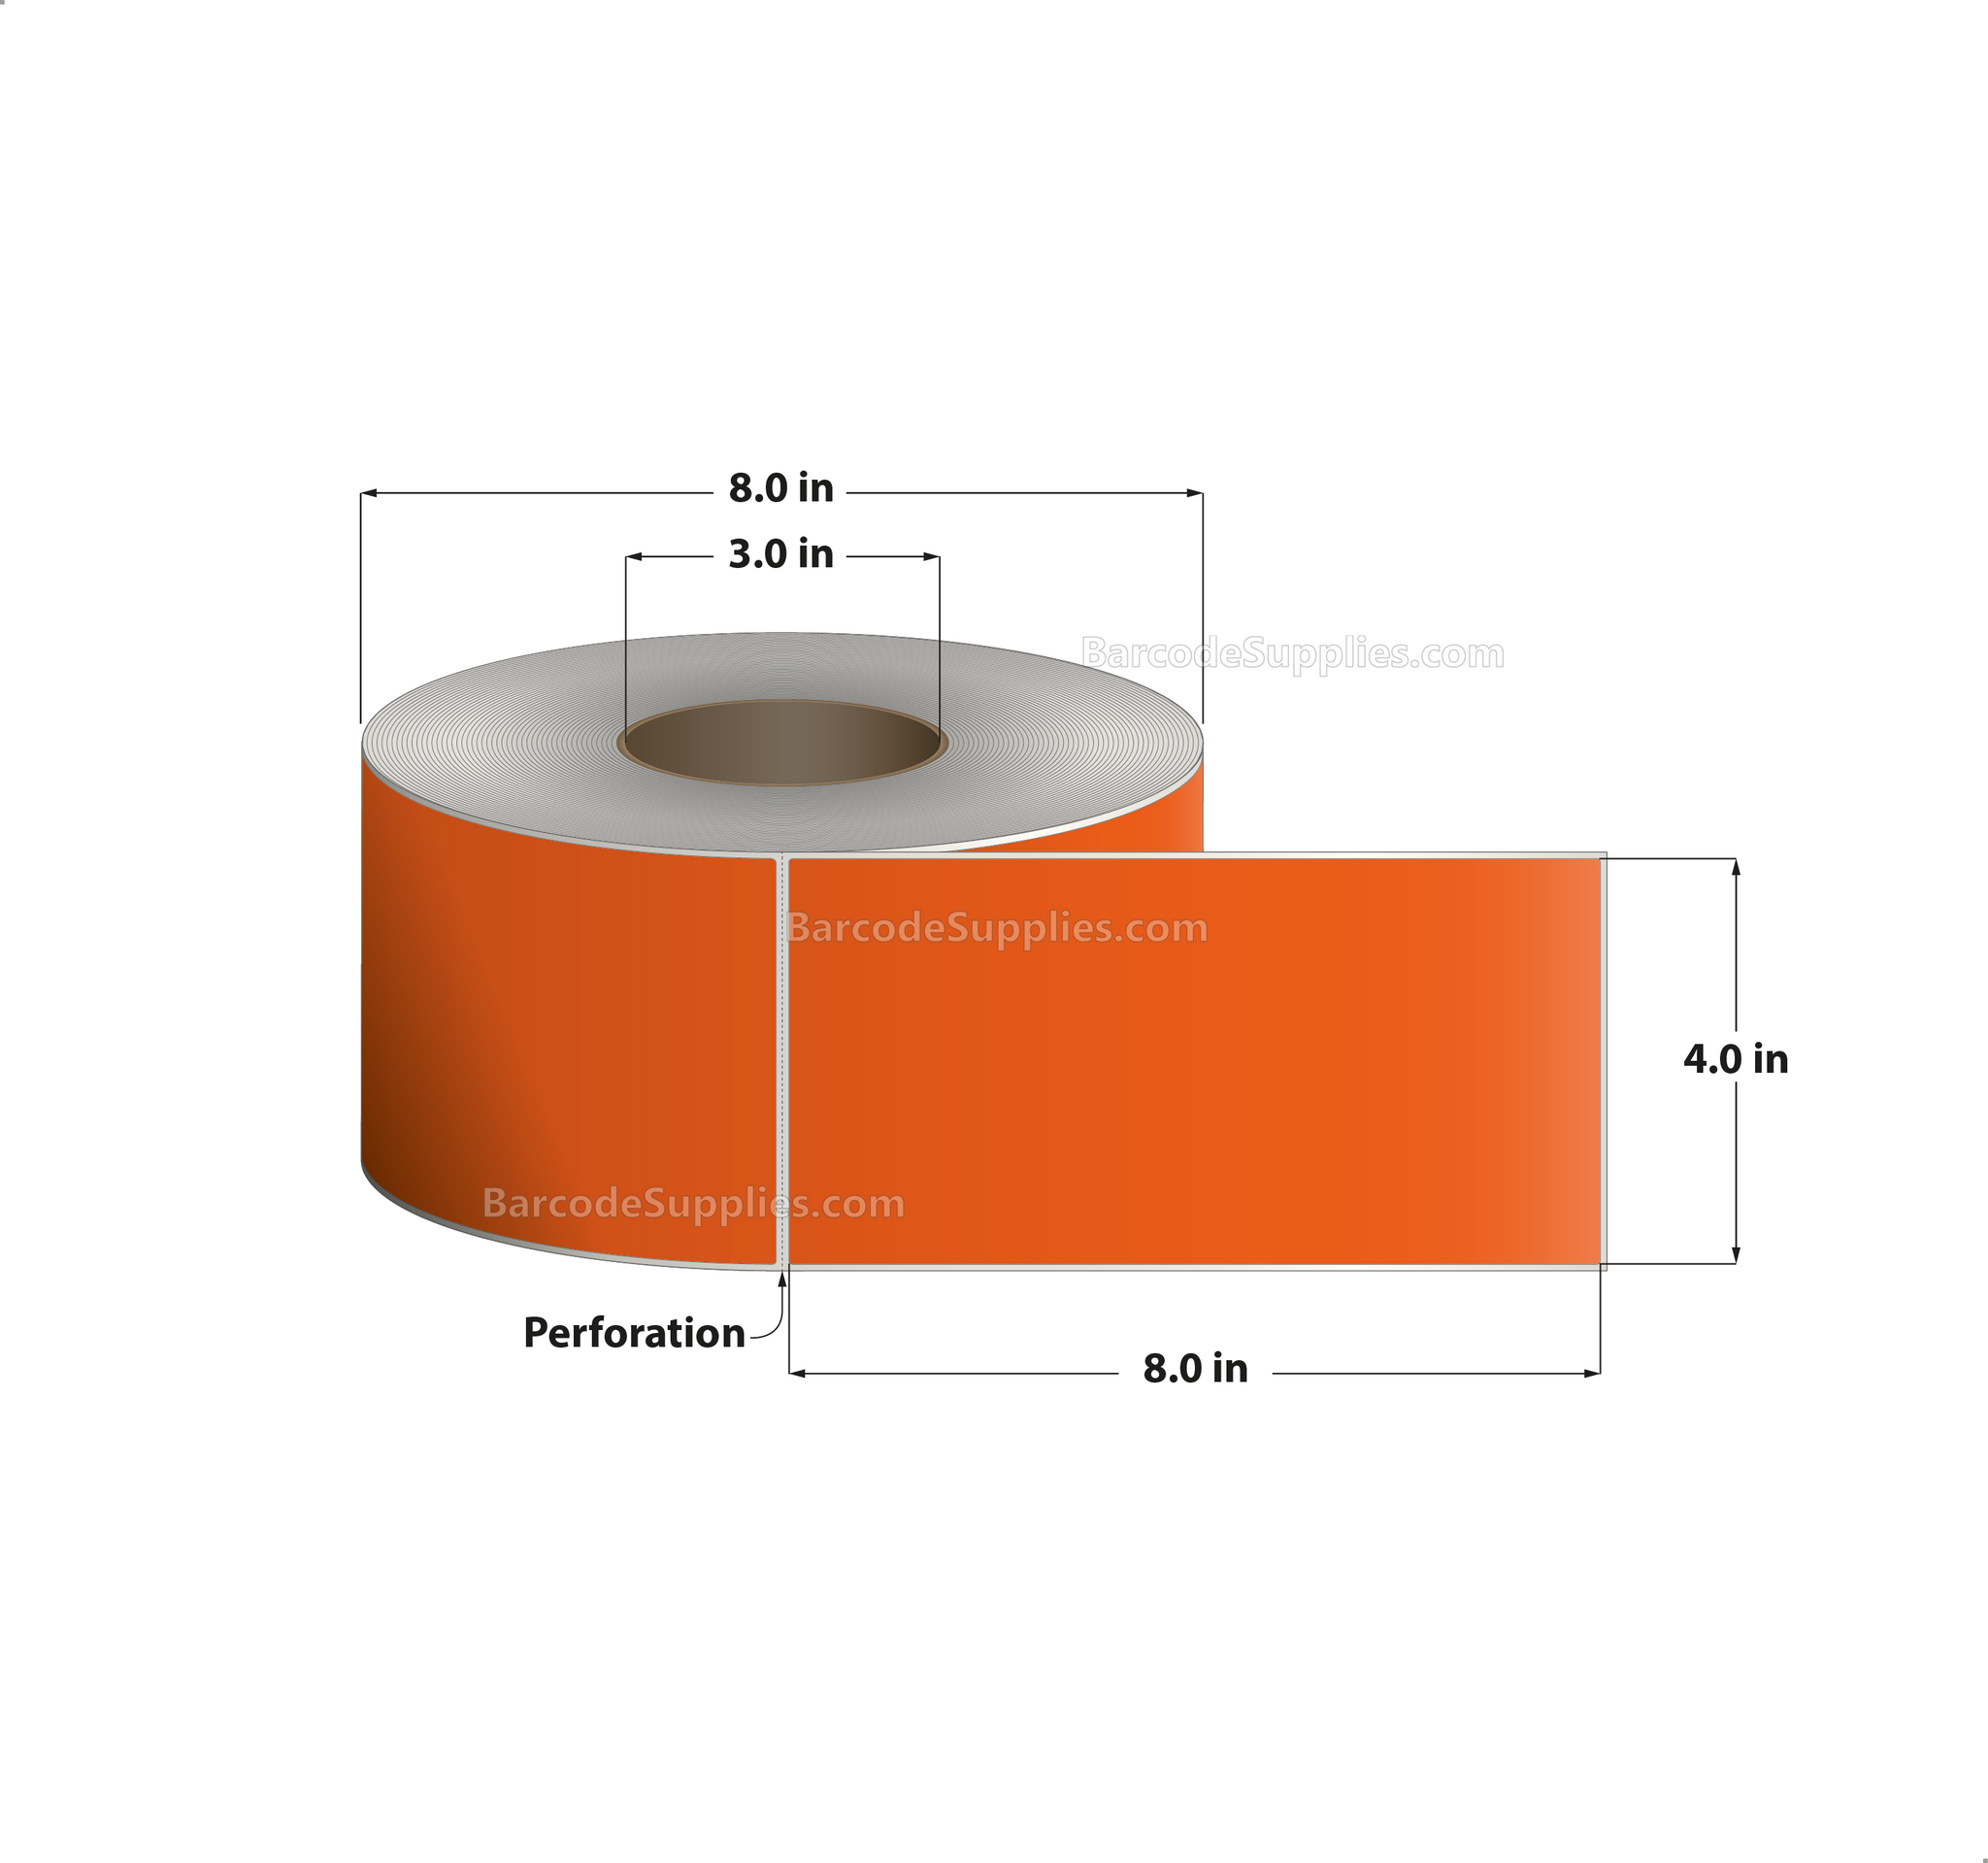 4 x 8 Thermal Transfer 1495 Orange Labels With Permanent Adhesive - Perforated - 750 Labels Per Roll - Carton Of 4 Rolls - 3000 Labels Total - MPN: RFC-4-8-750-OR